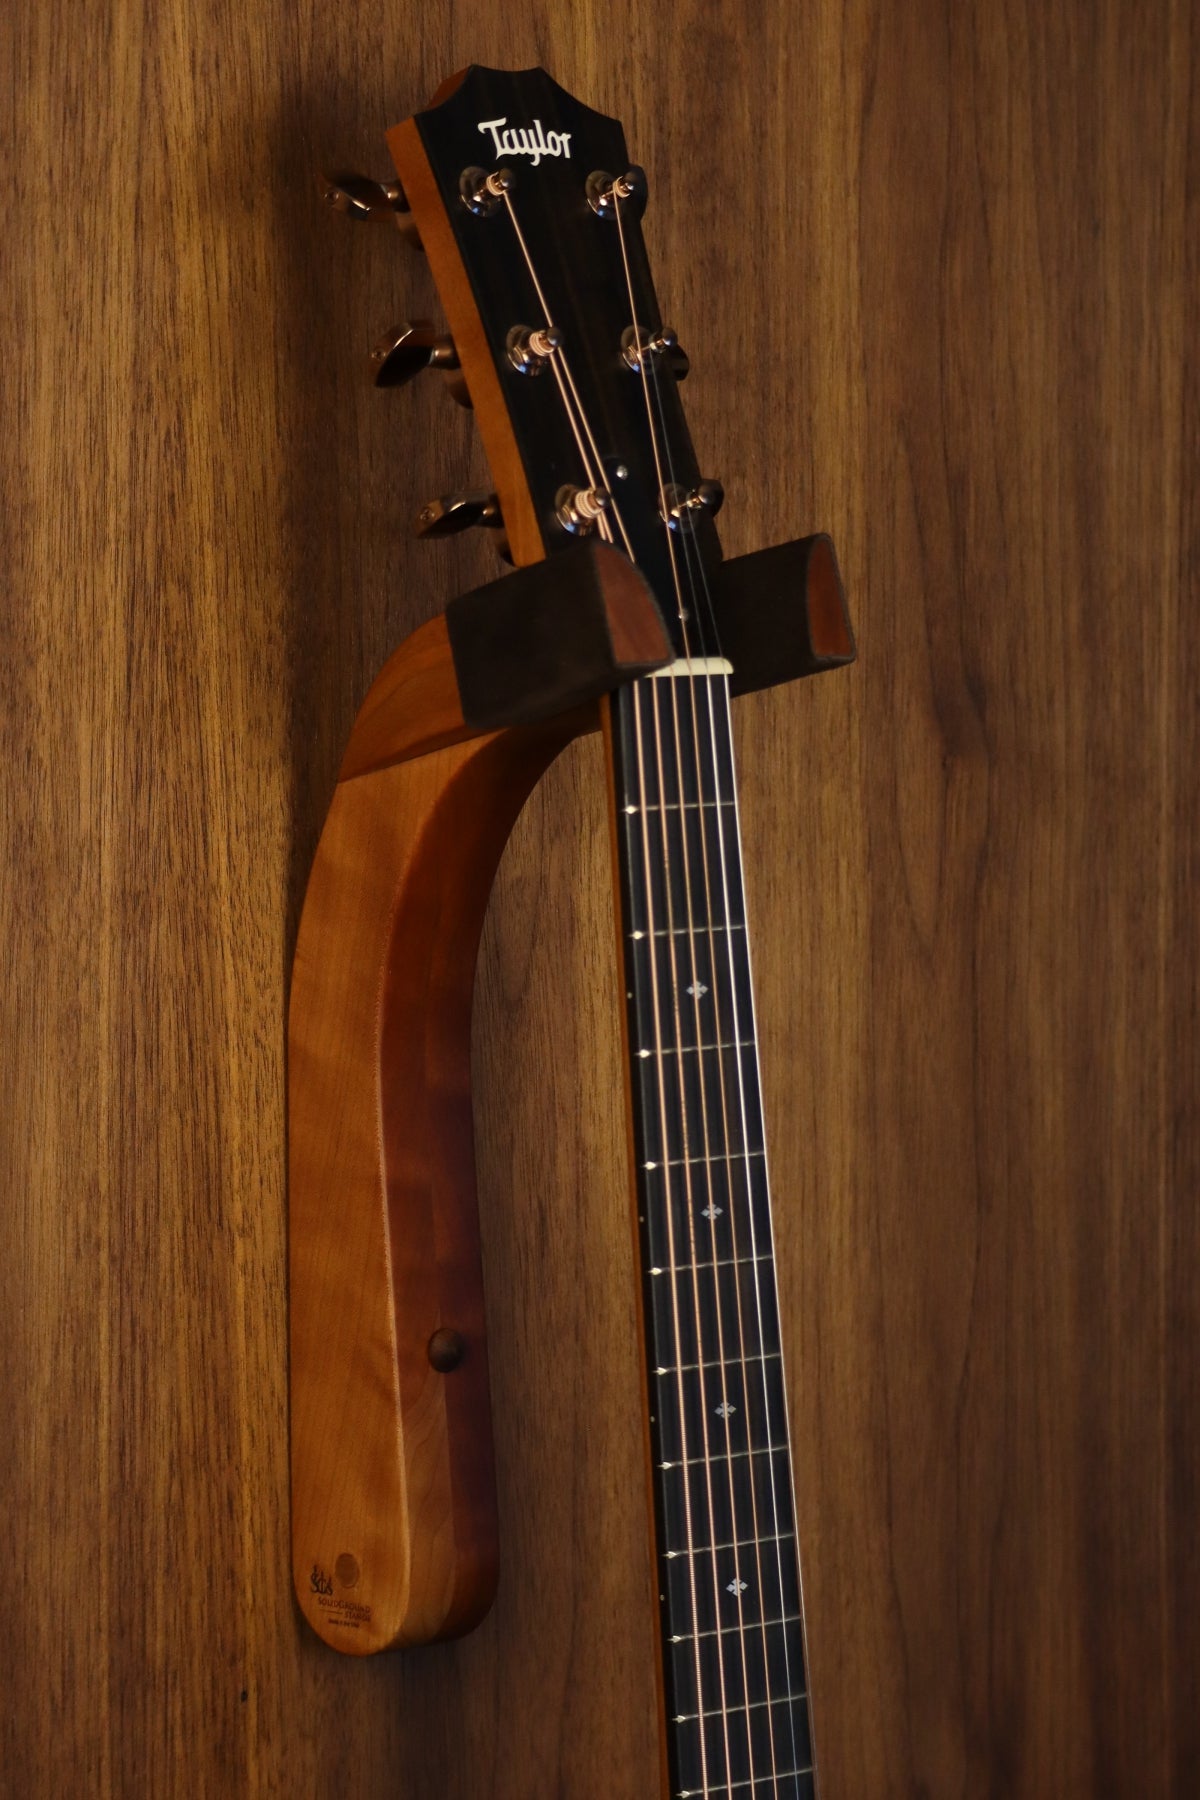 Cherry wood guitar wall mount hanger installed on paneled wall with Taylor guitar